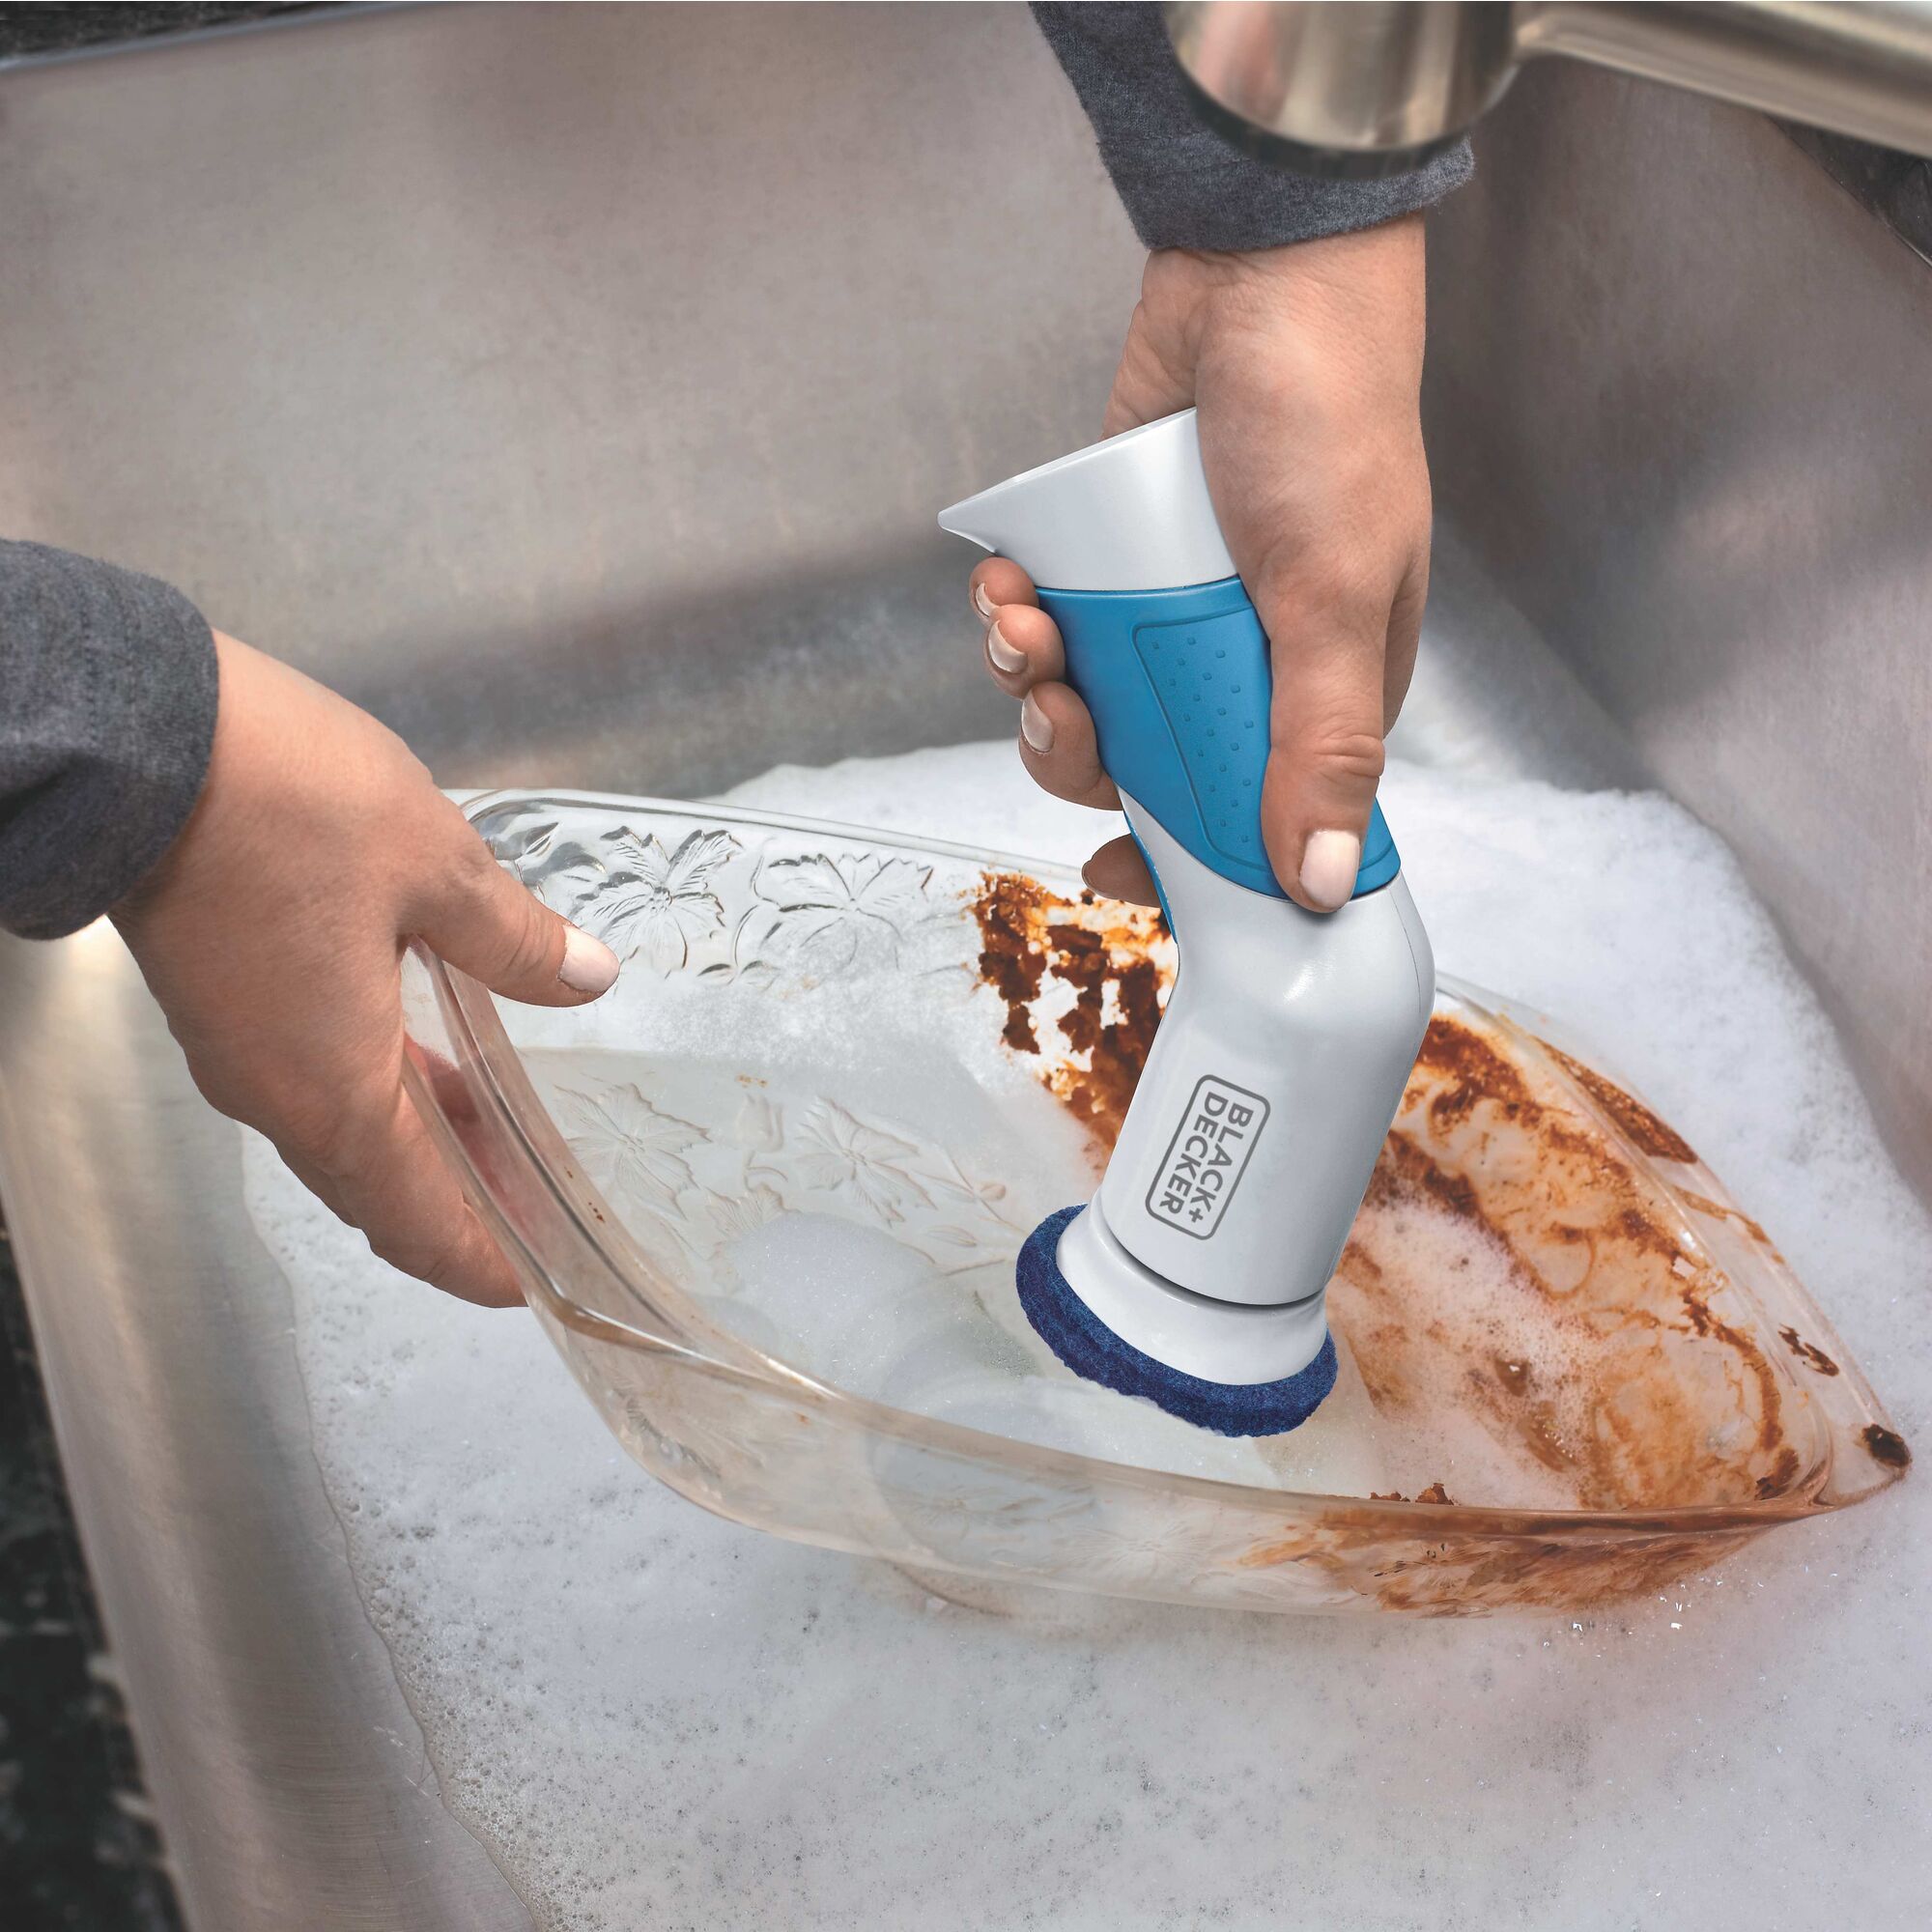 Woman using Power Scrubber Brush to clean a dirty dish in a sink.